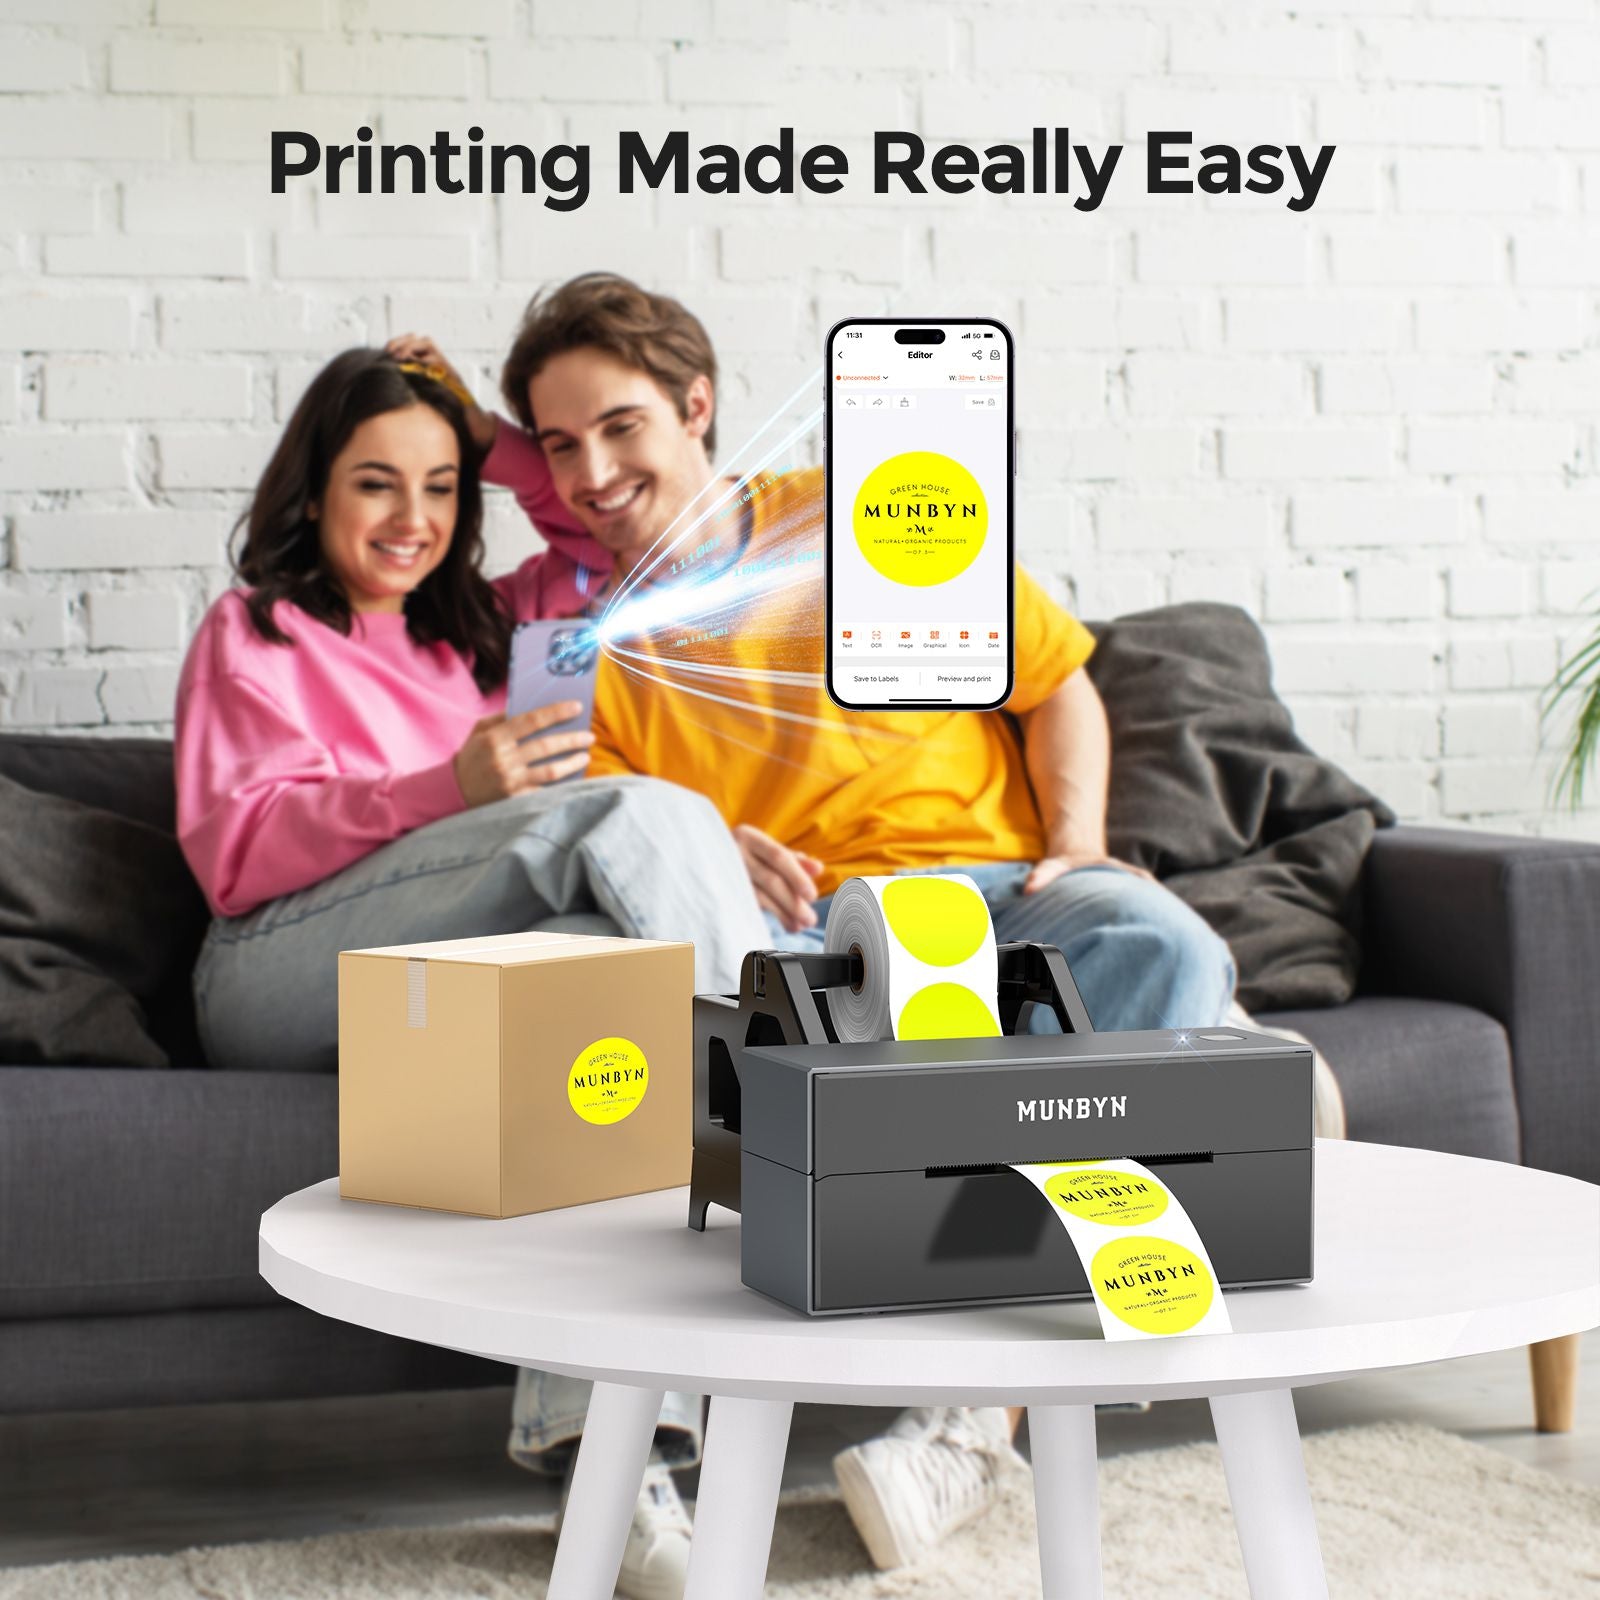 Portable Printers Bring Your Smartphone Photos to Life